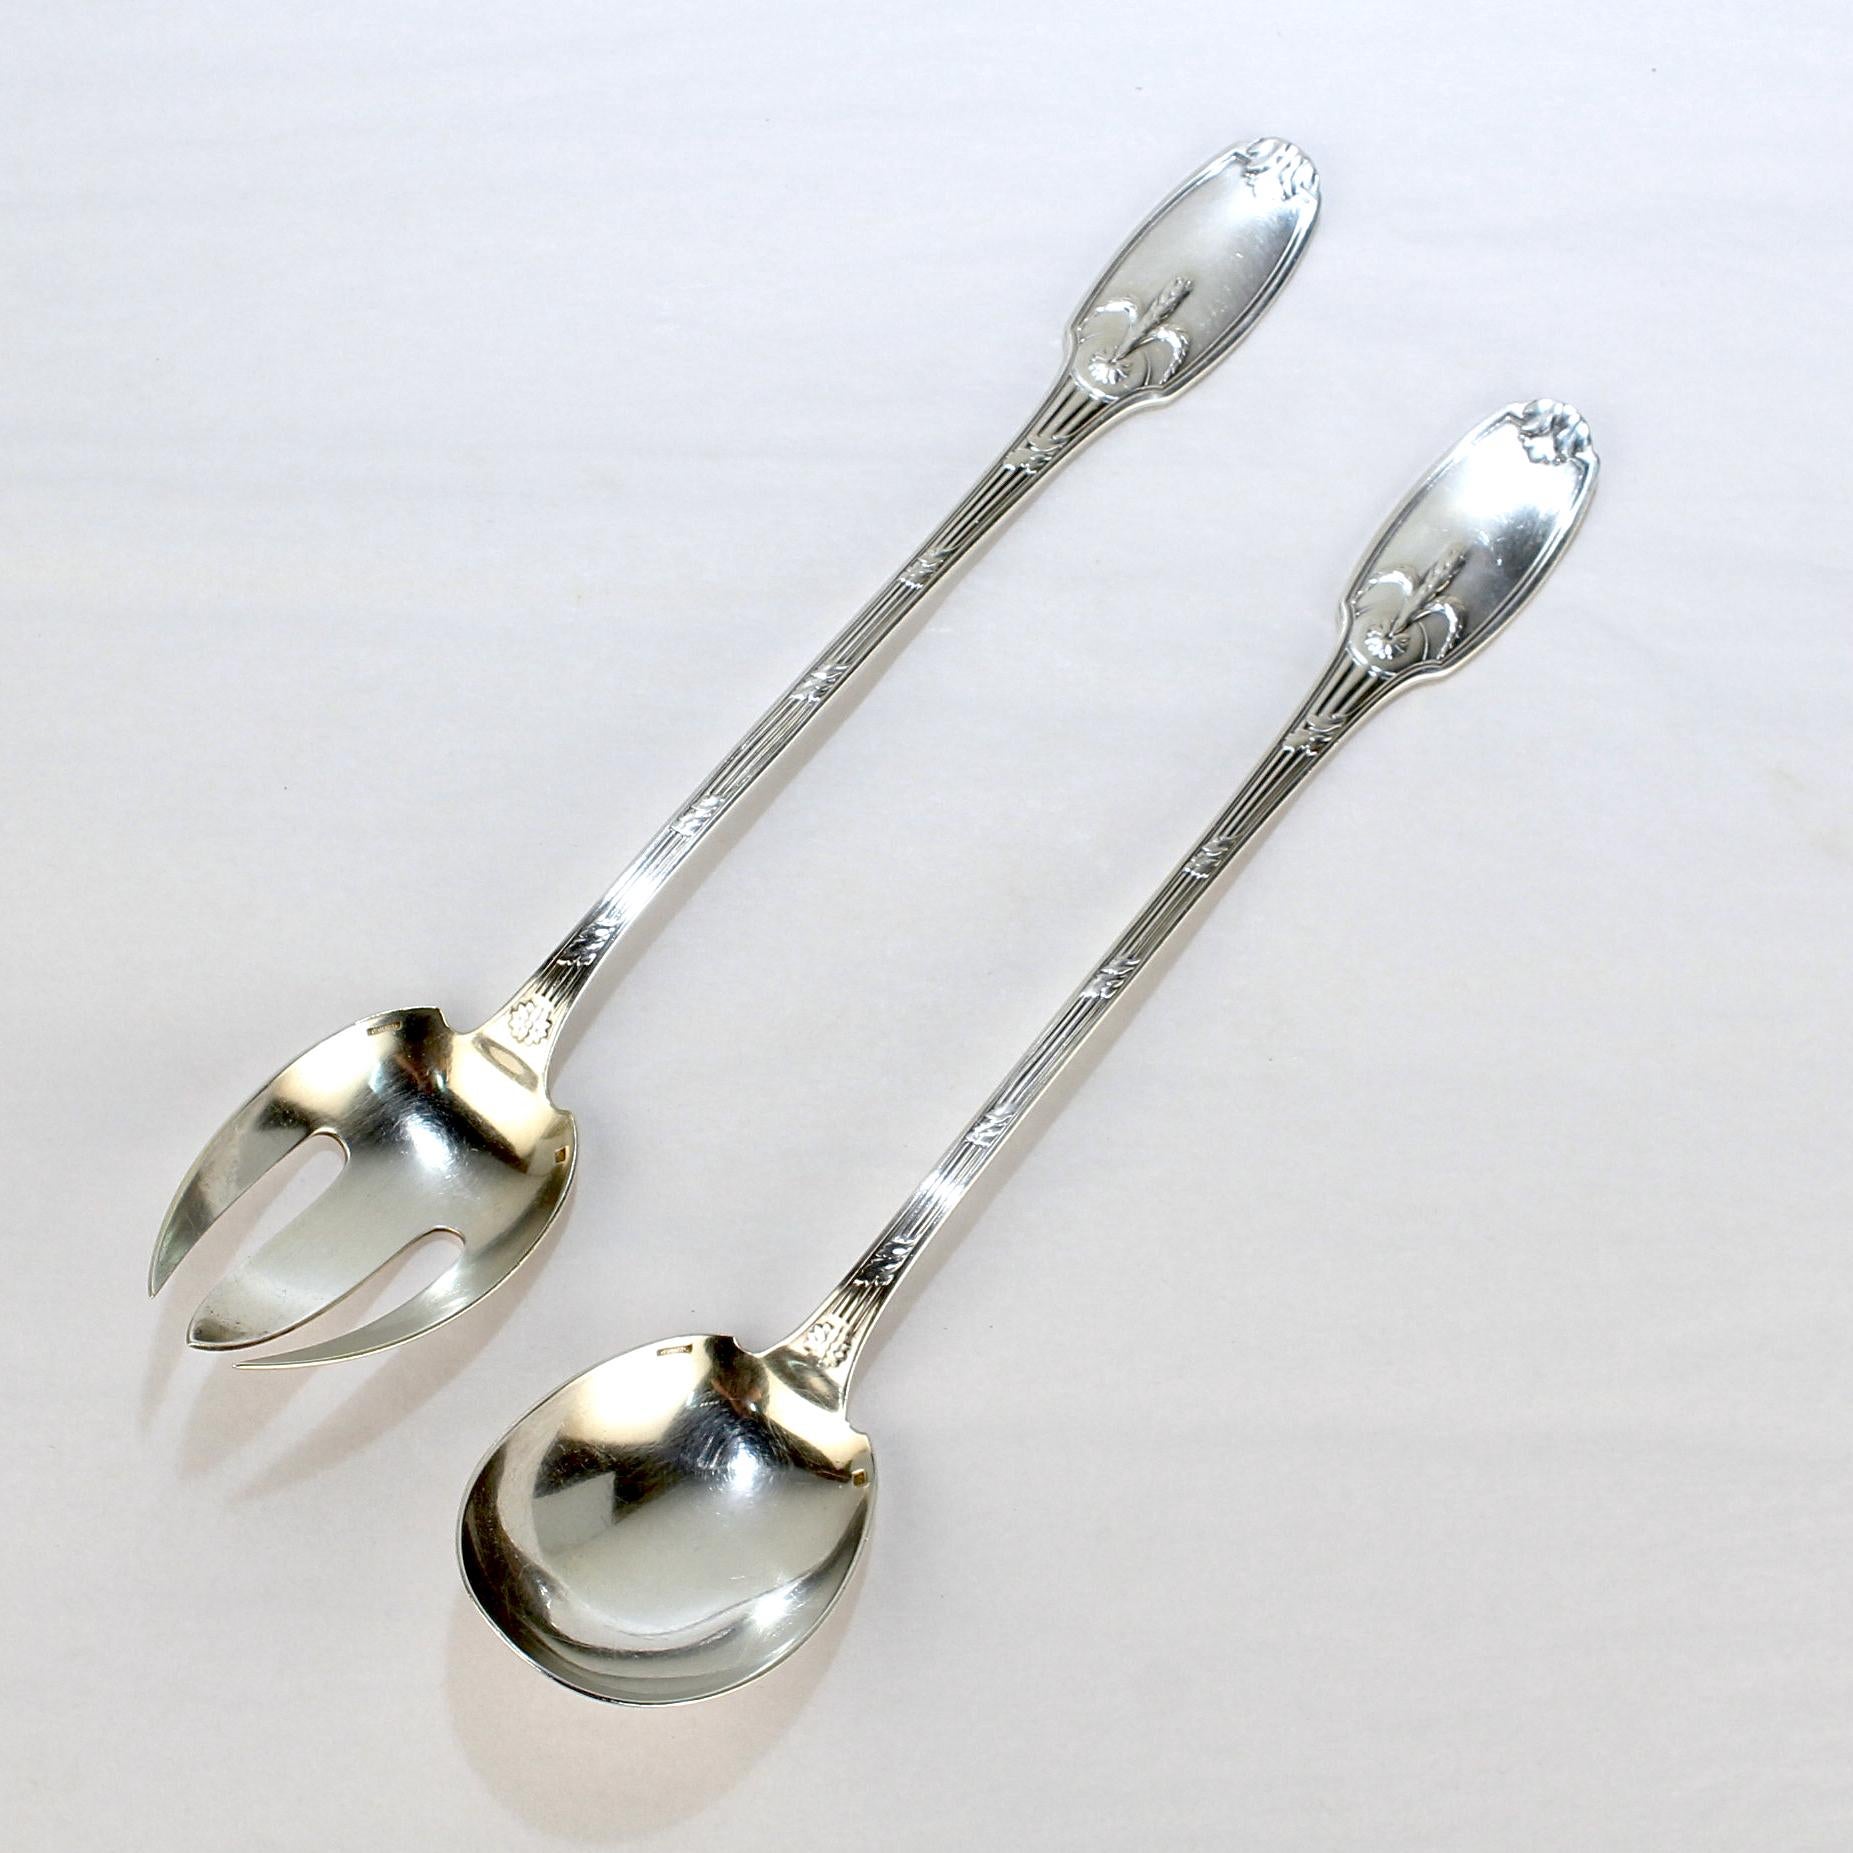 A fine pair of silverplate salad servers.

By Christofle France.

In the Delafosse pattern with wheat & flower decoration throughout. 

Simply a wonderful pair of salad servers in the hard-to-find Delafosse pattern!

Date:
Early 20th